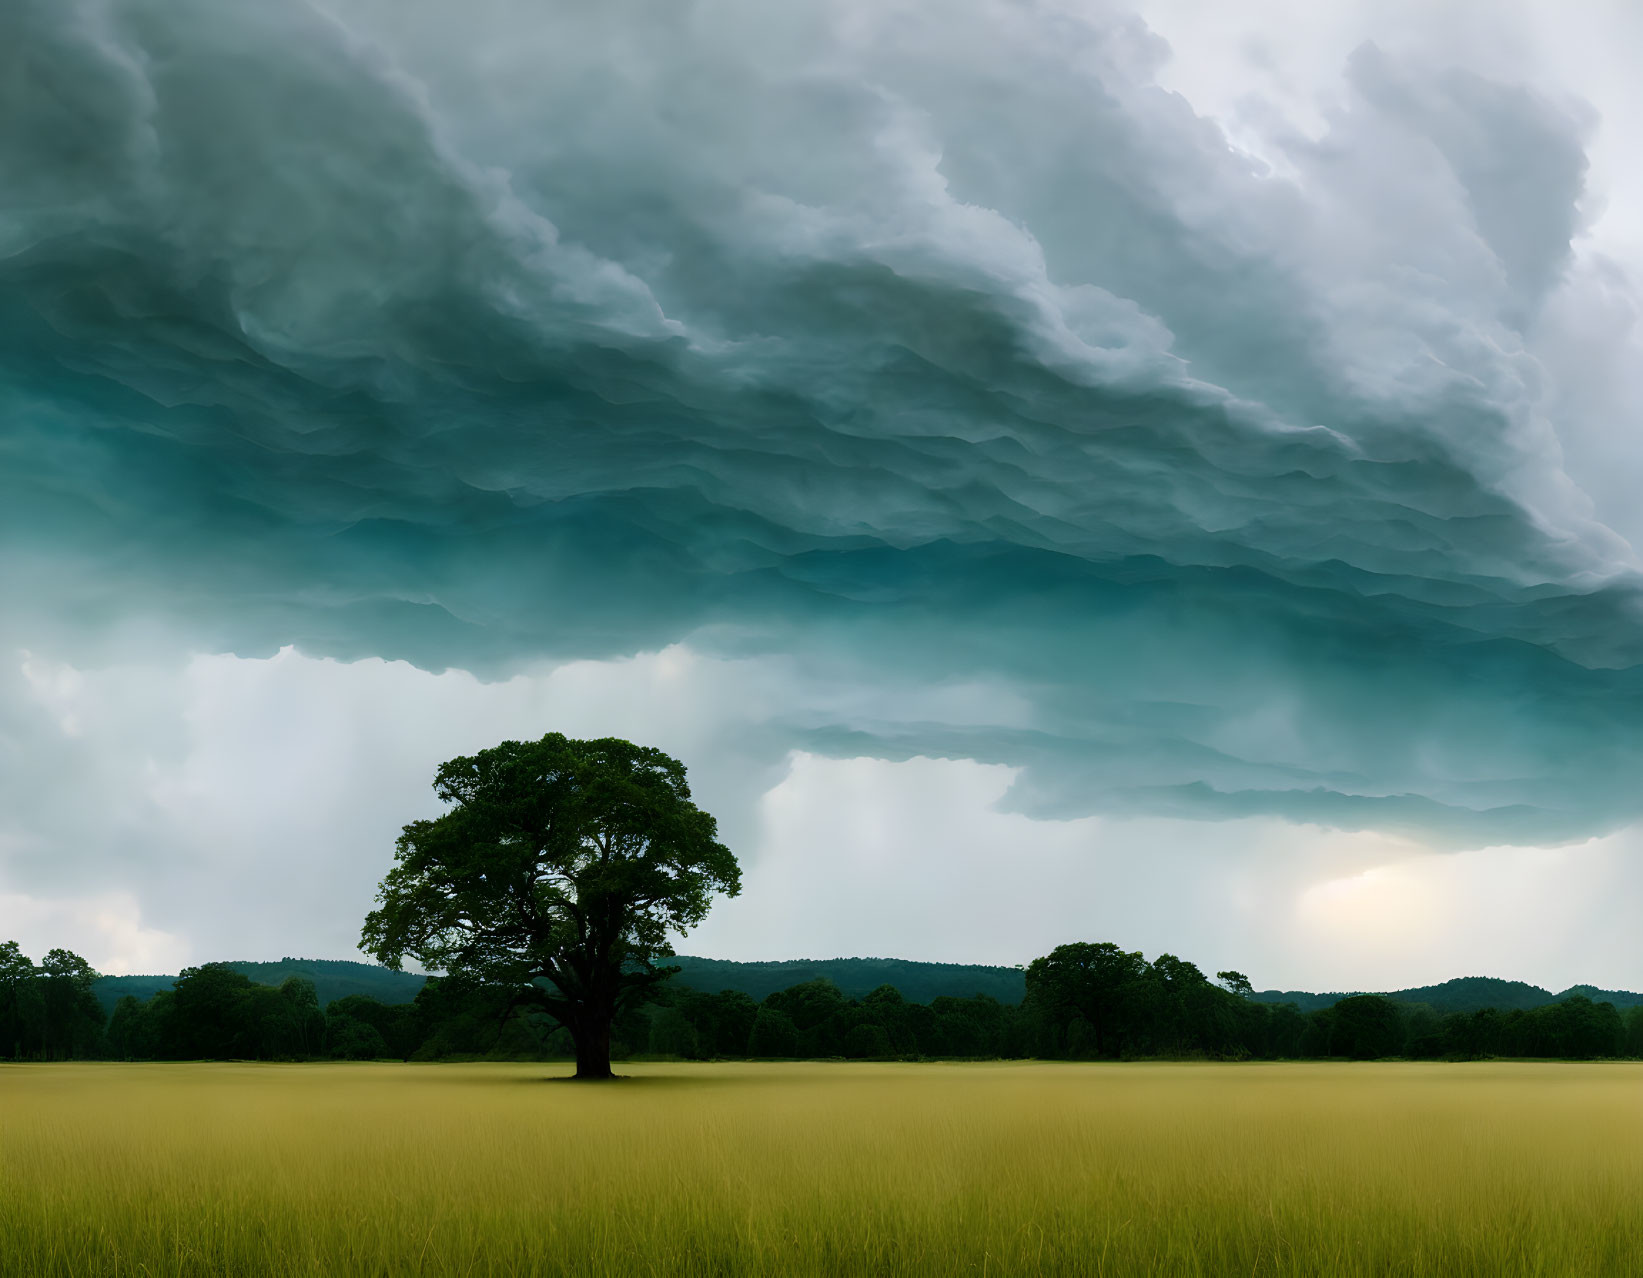 Solitary tree under dramatic storm cloud in tranquil landscape